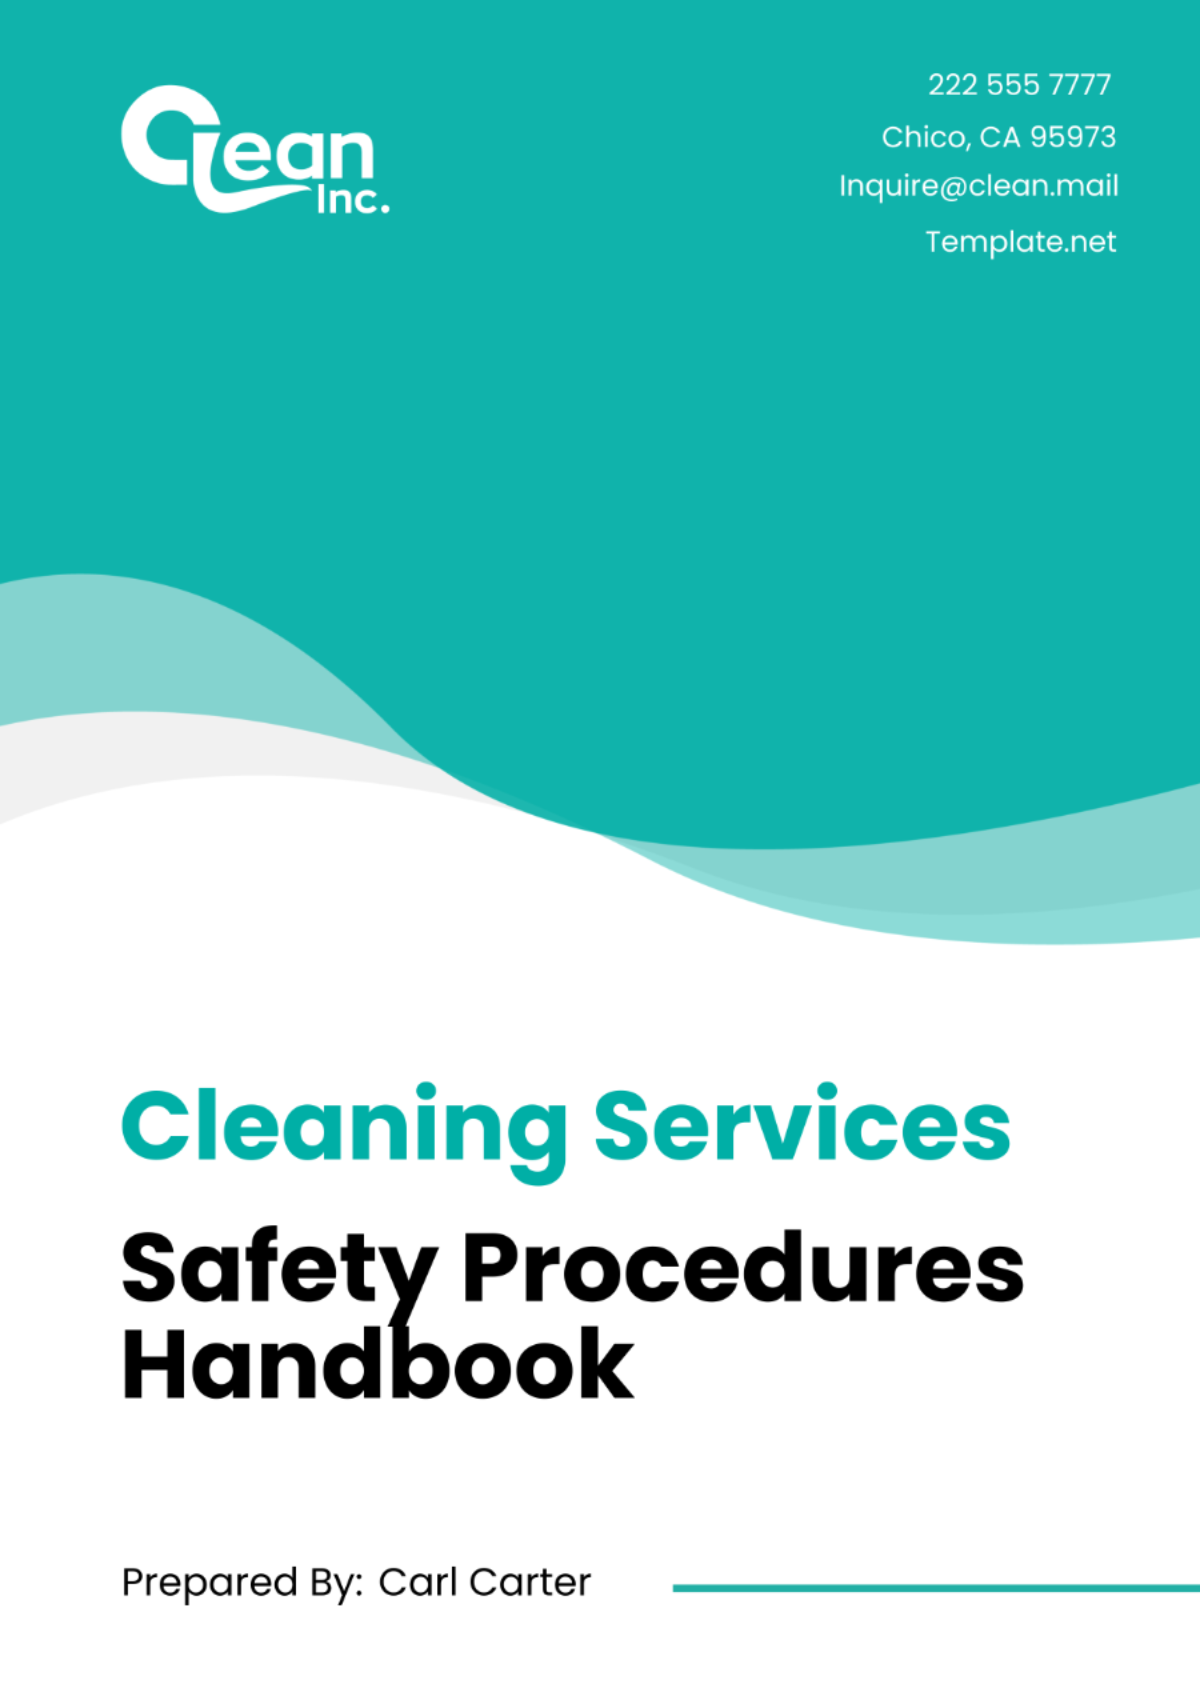 Cleaning Services Safety Procedures Handbook Template